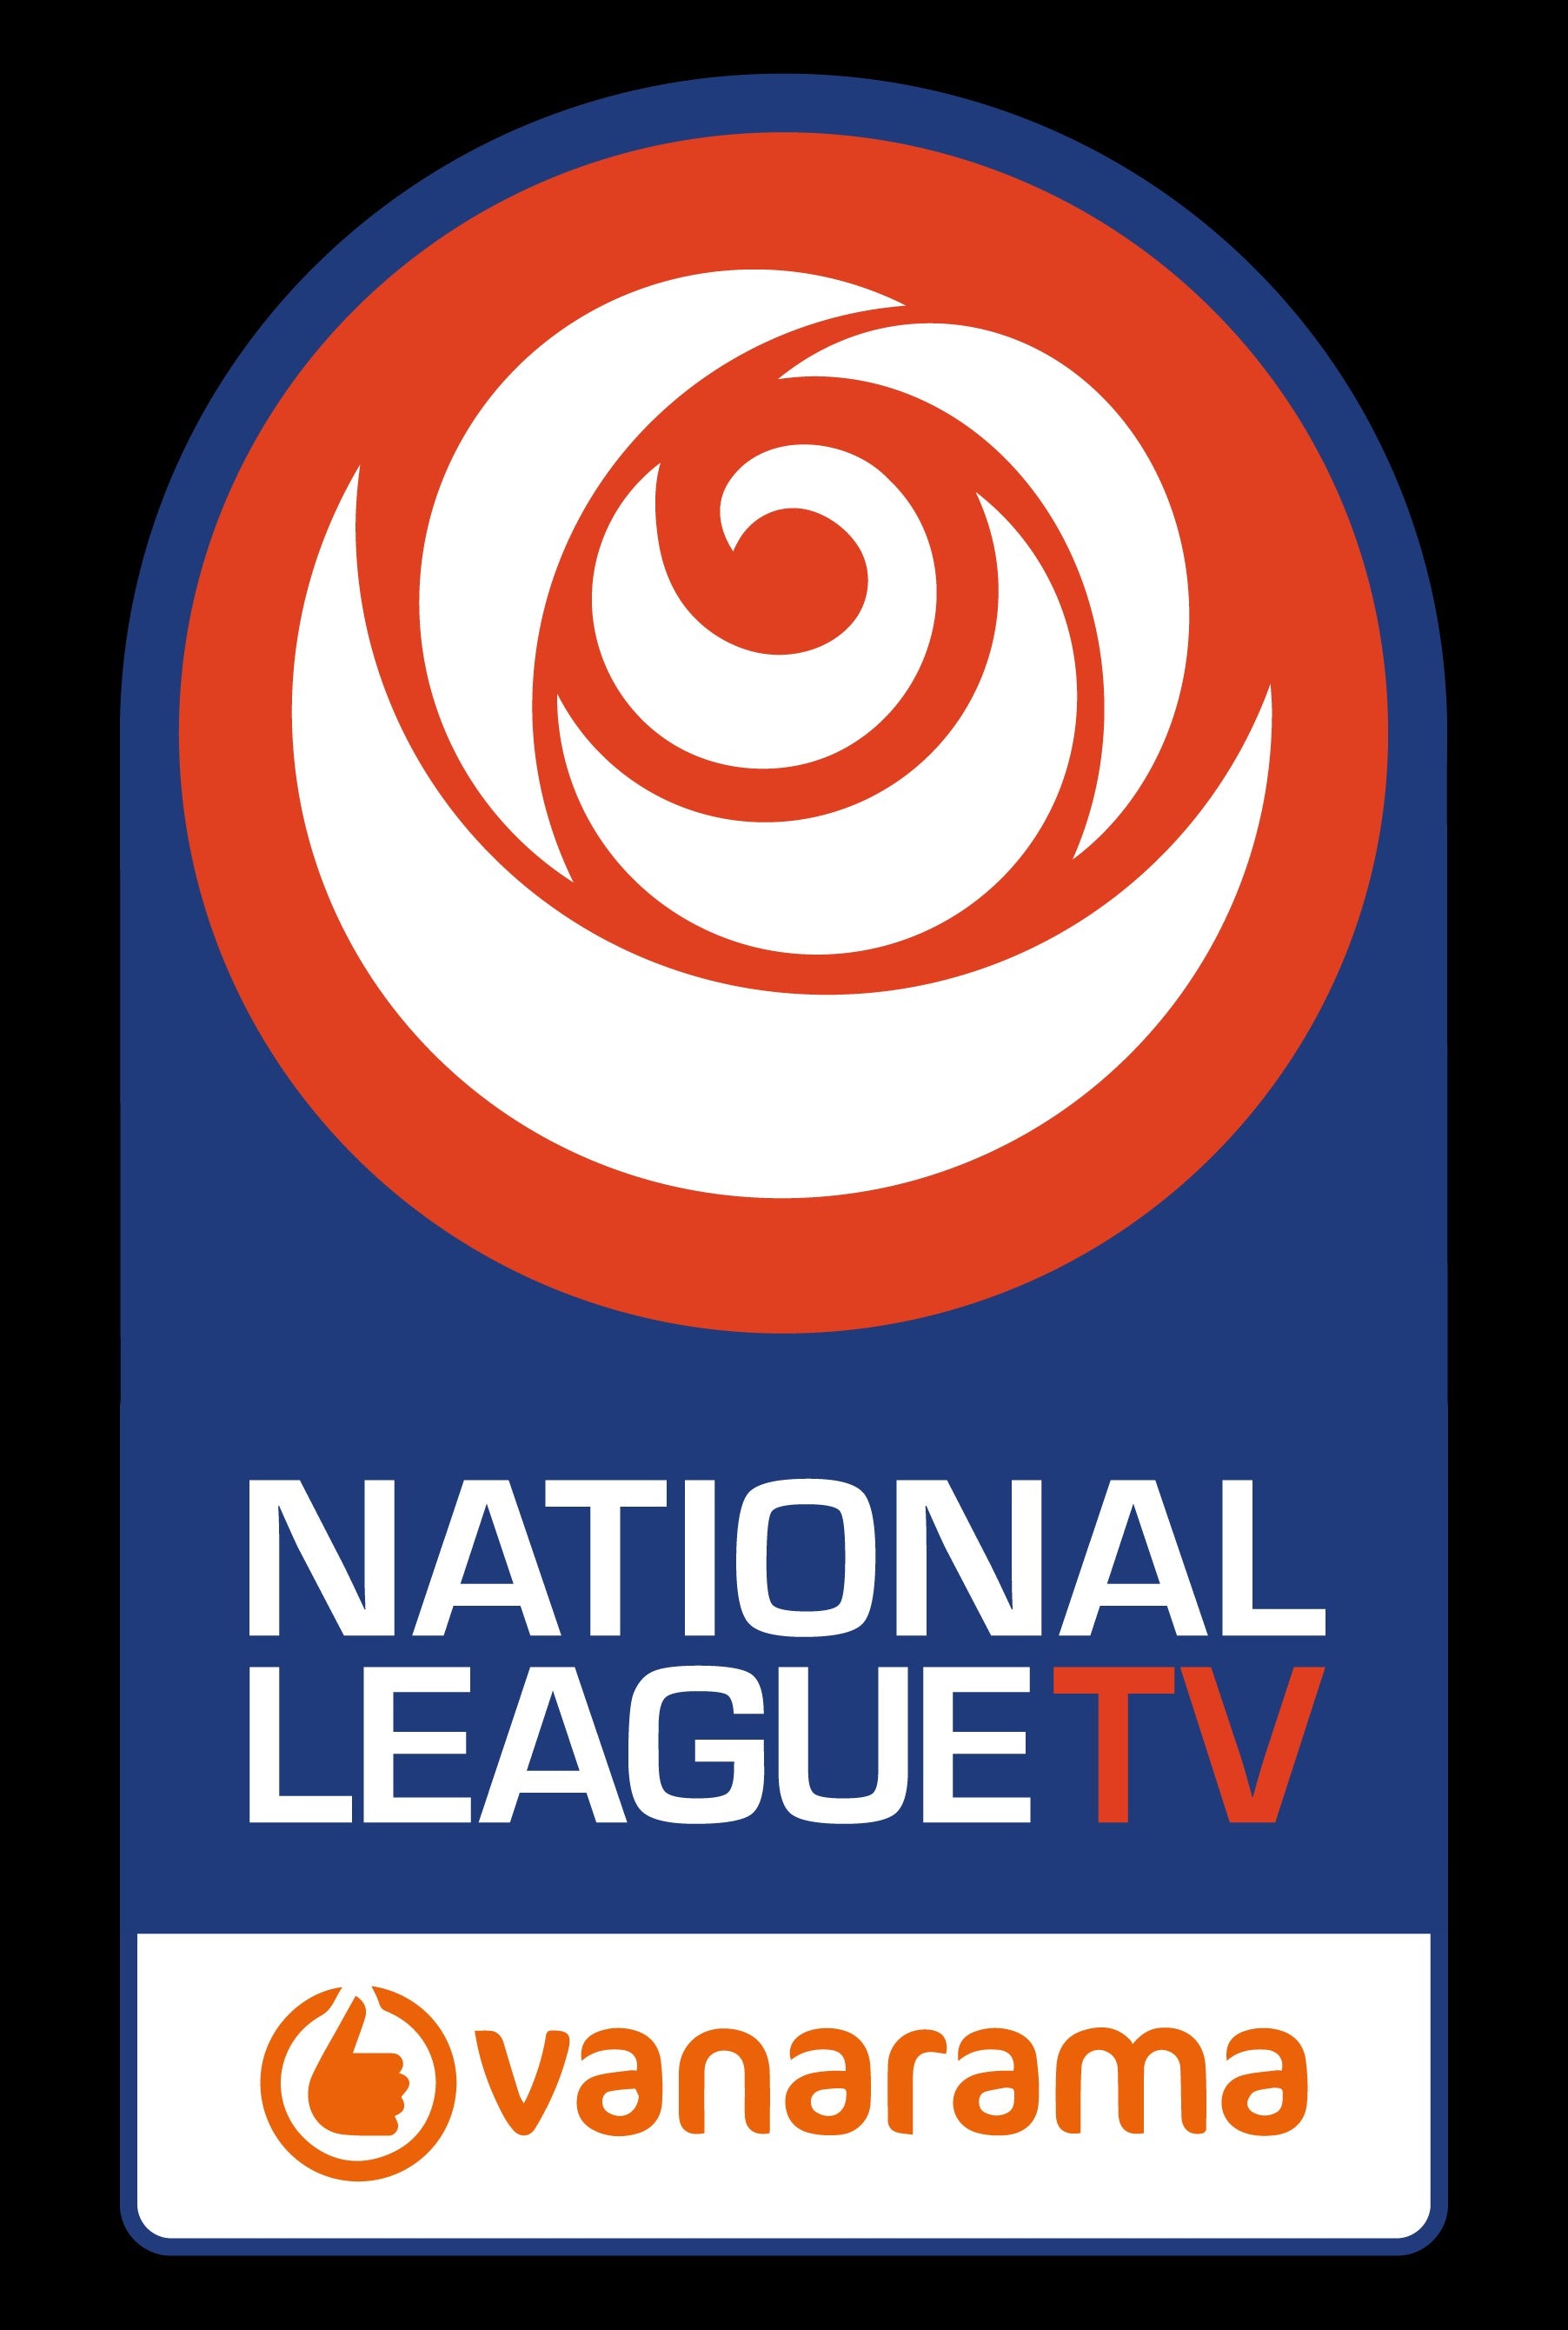 Magpies to appear on National League TV